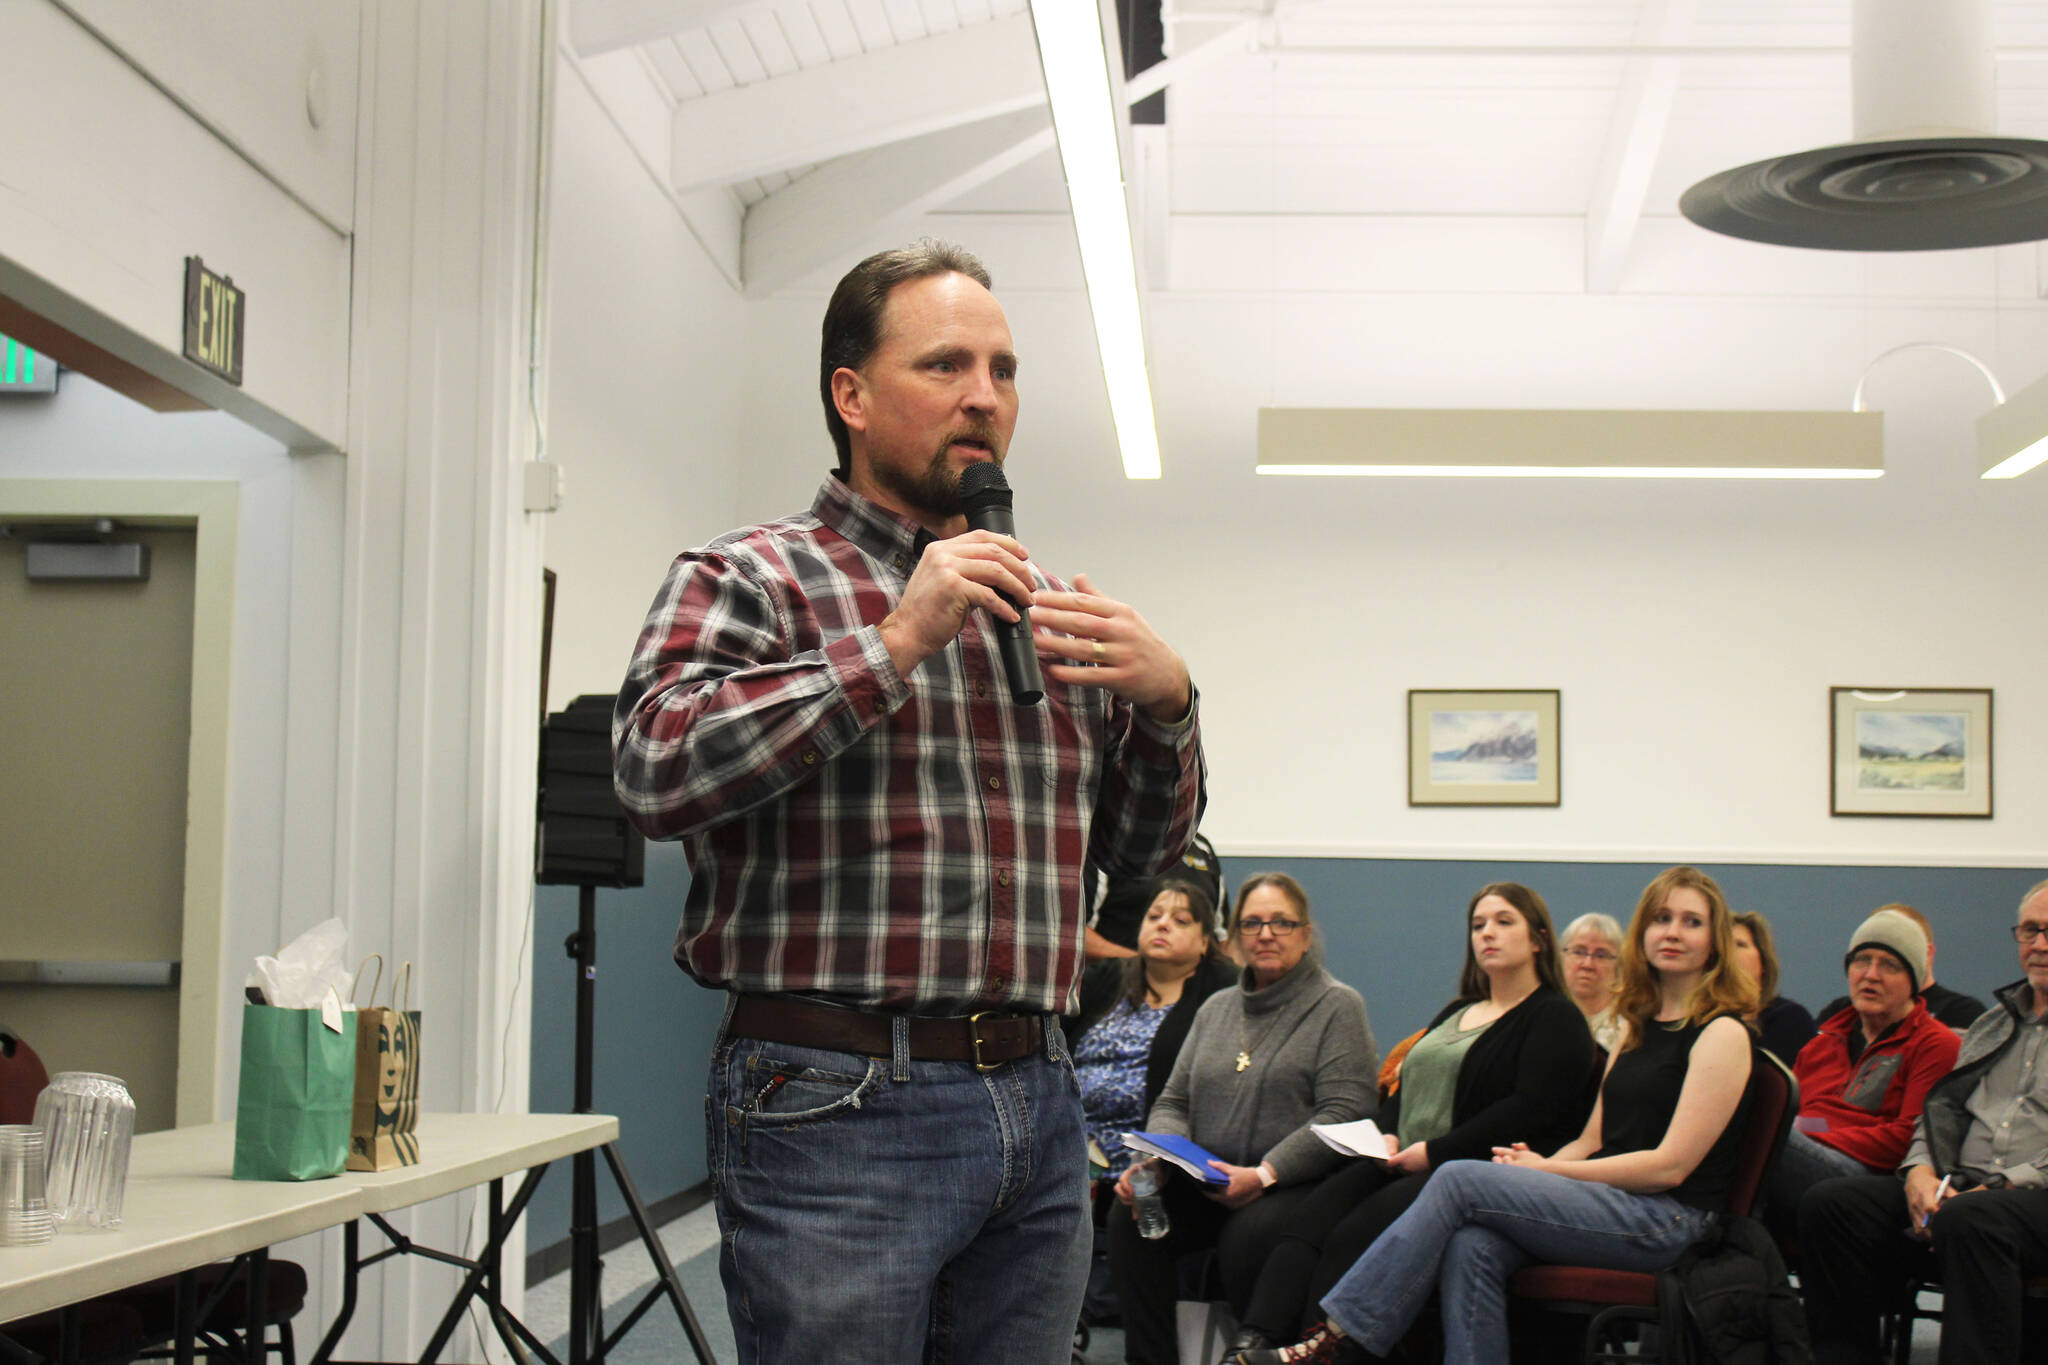 Rep. Ben Carpenter facilitates a town hall in Nikiski, Alaska, about a new cold weather shelter in the community on Wednesday, Dec. 15, 2021. (Ashlyn O’Hara/Peninsula Clarion)